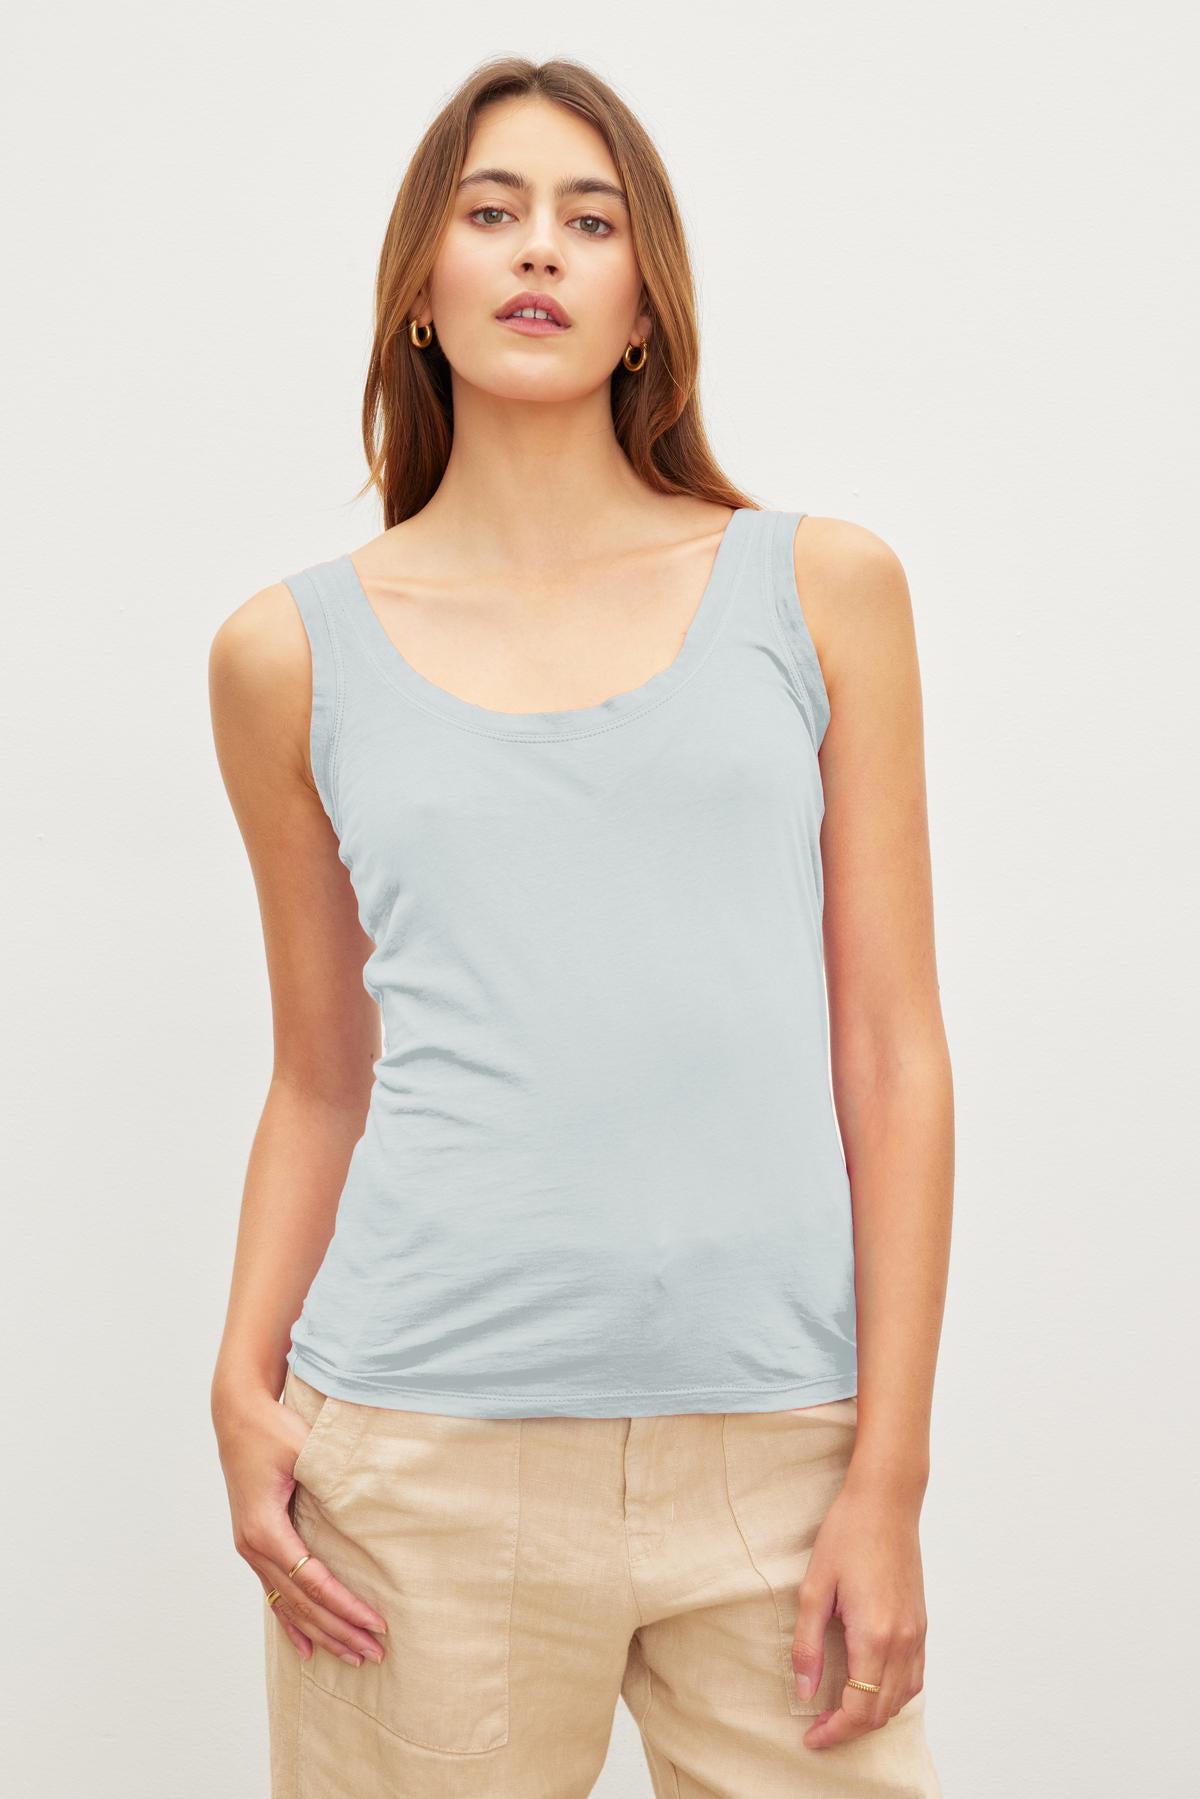 A woman with long brown hair wears a light grey gauzy MOSSY TANK TOP by Velvet by Graham & Spencer and beige pants, standing against a plain white background.-37241163186369